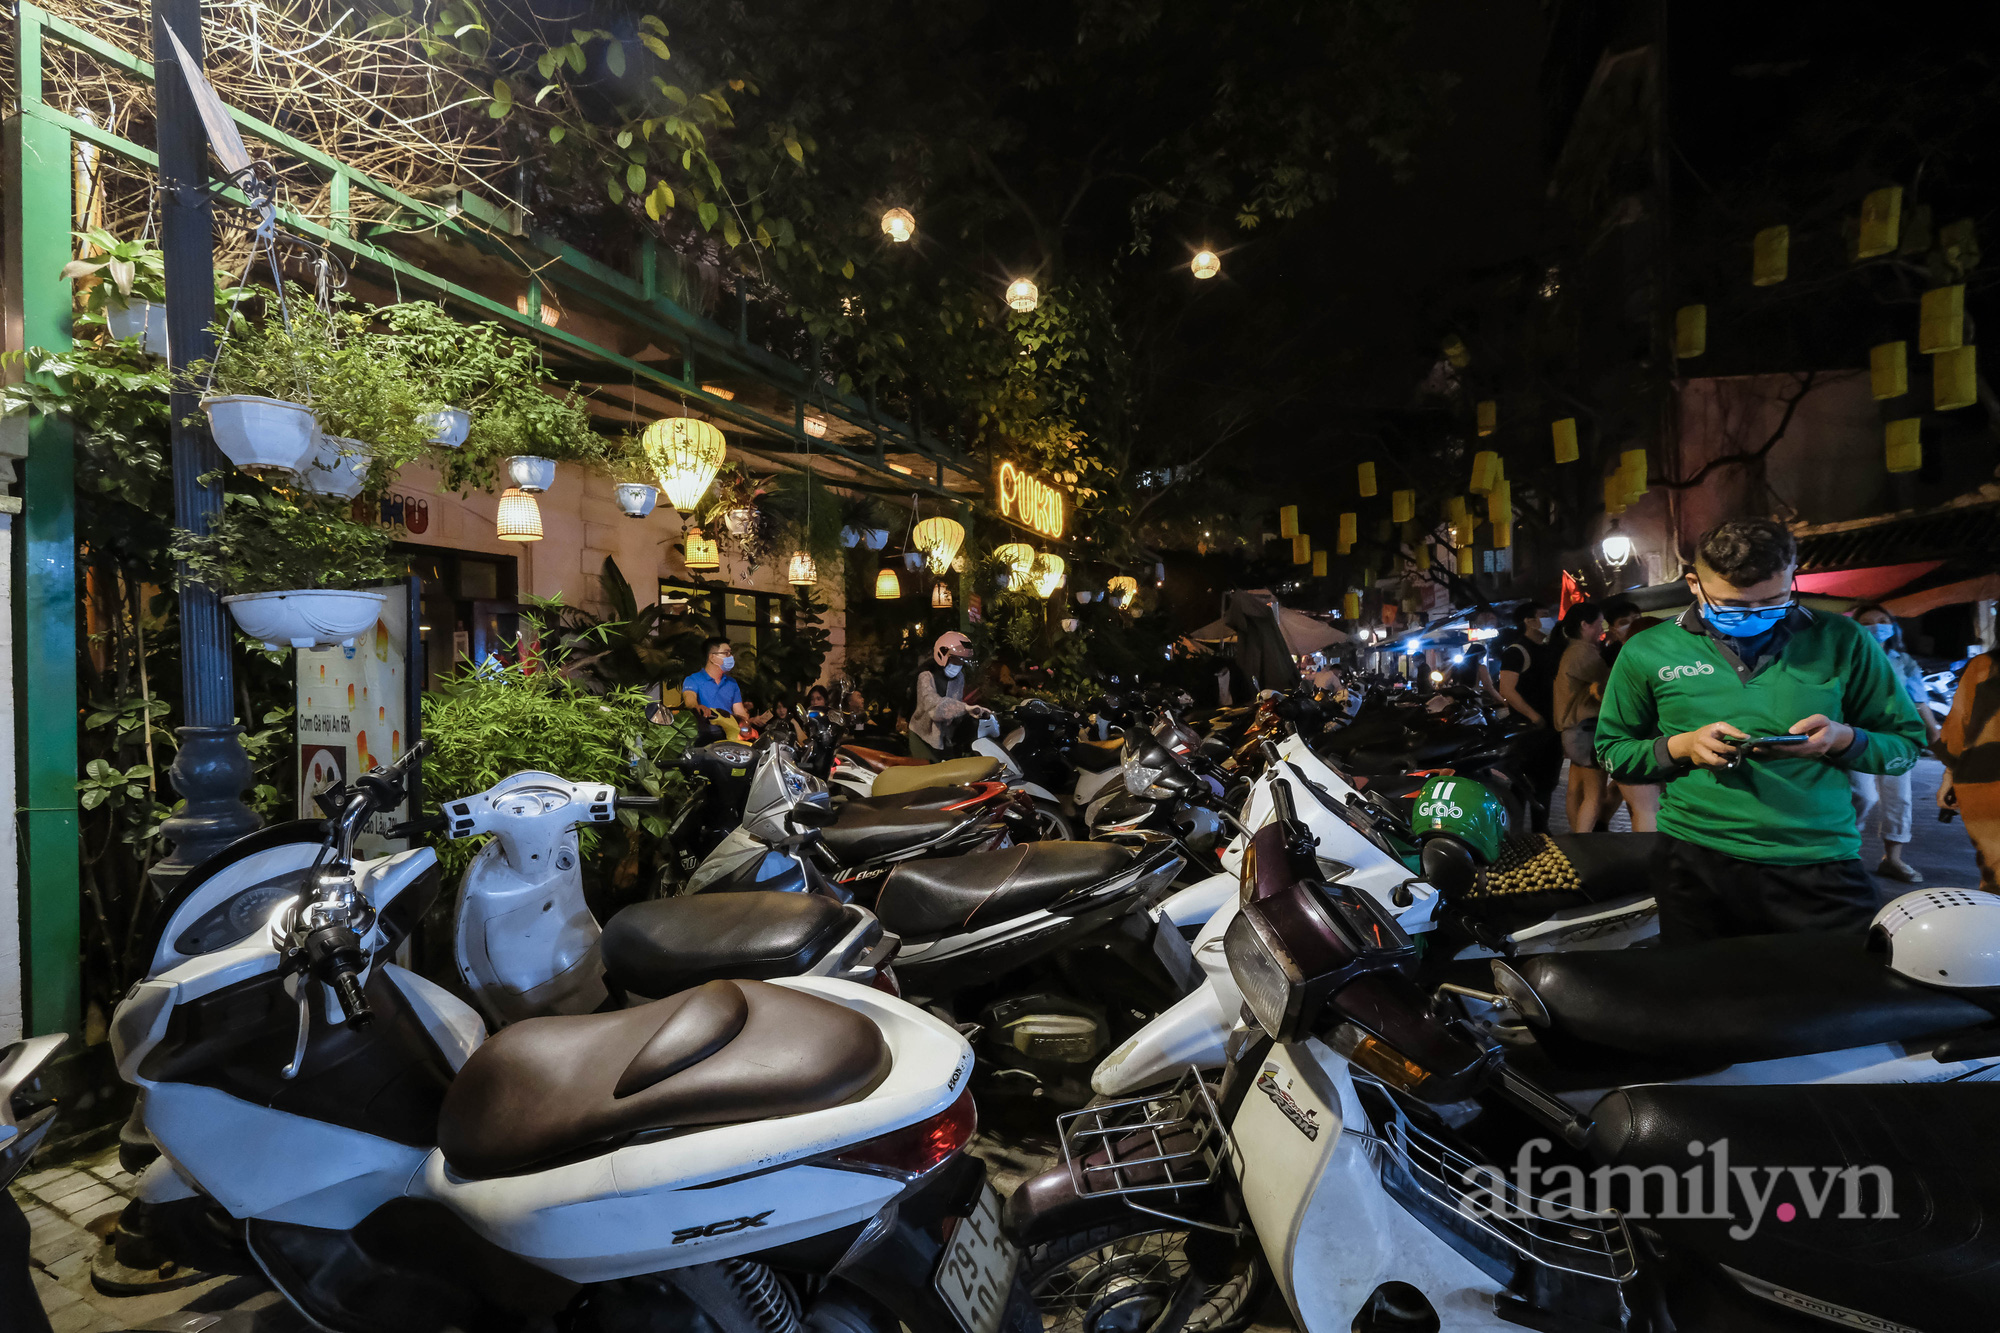 The first night Hanoi allows restaurants and eateries to operate after 9pm: Street 